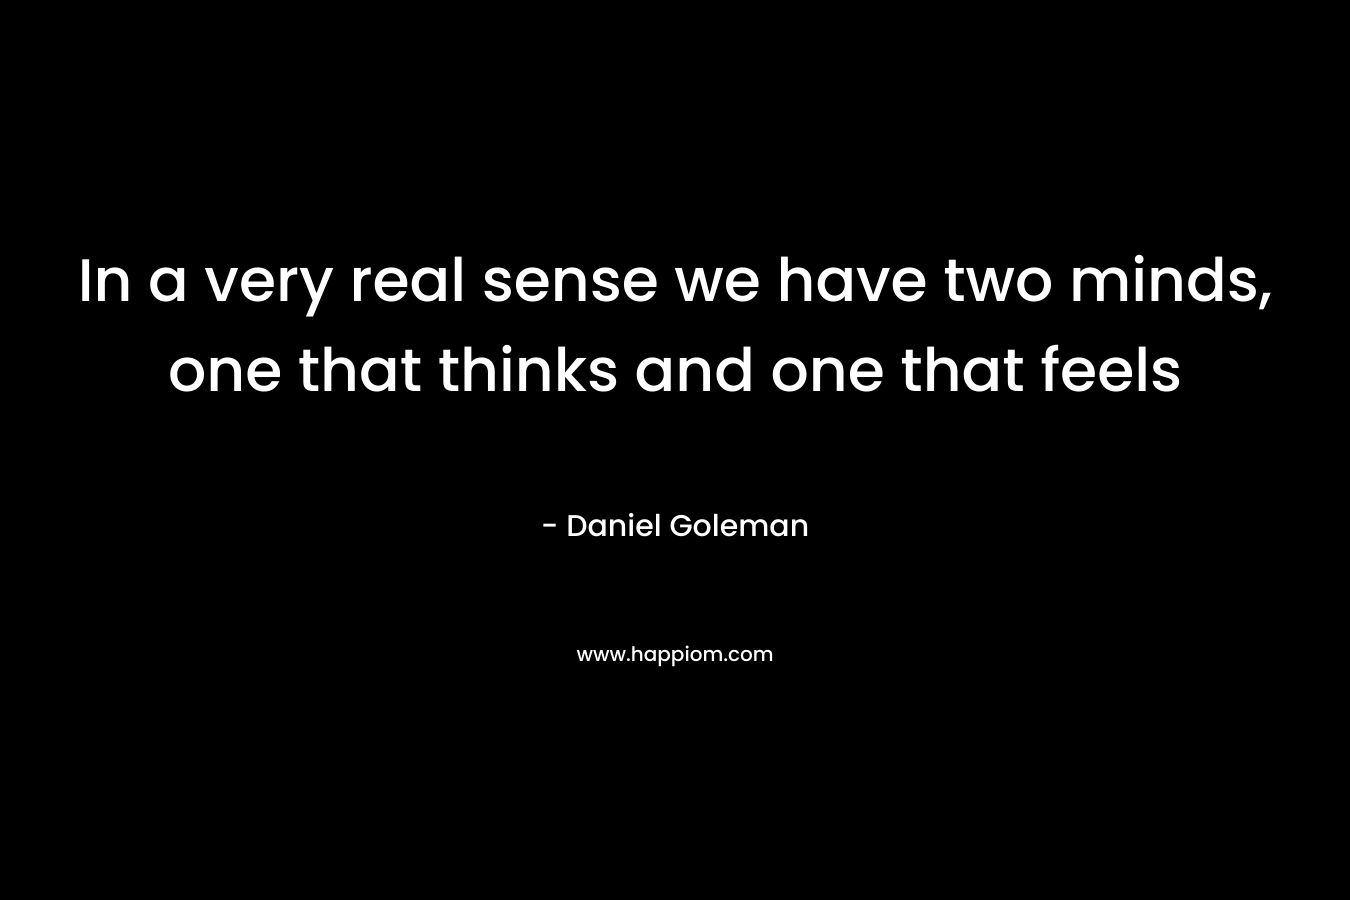 In a very real sense we have two minds, one that thinks and one that feels